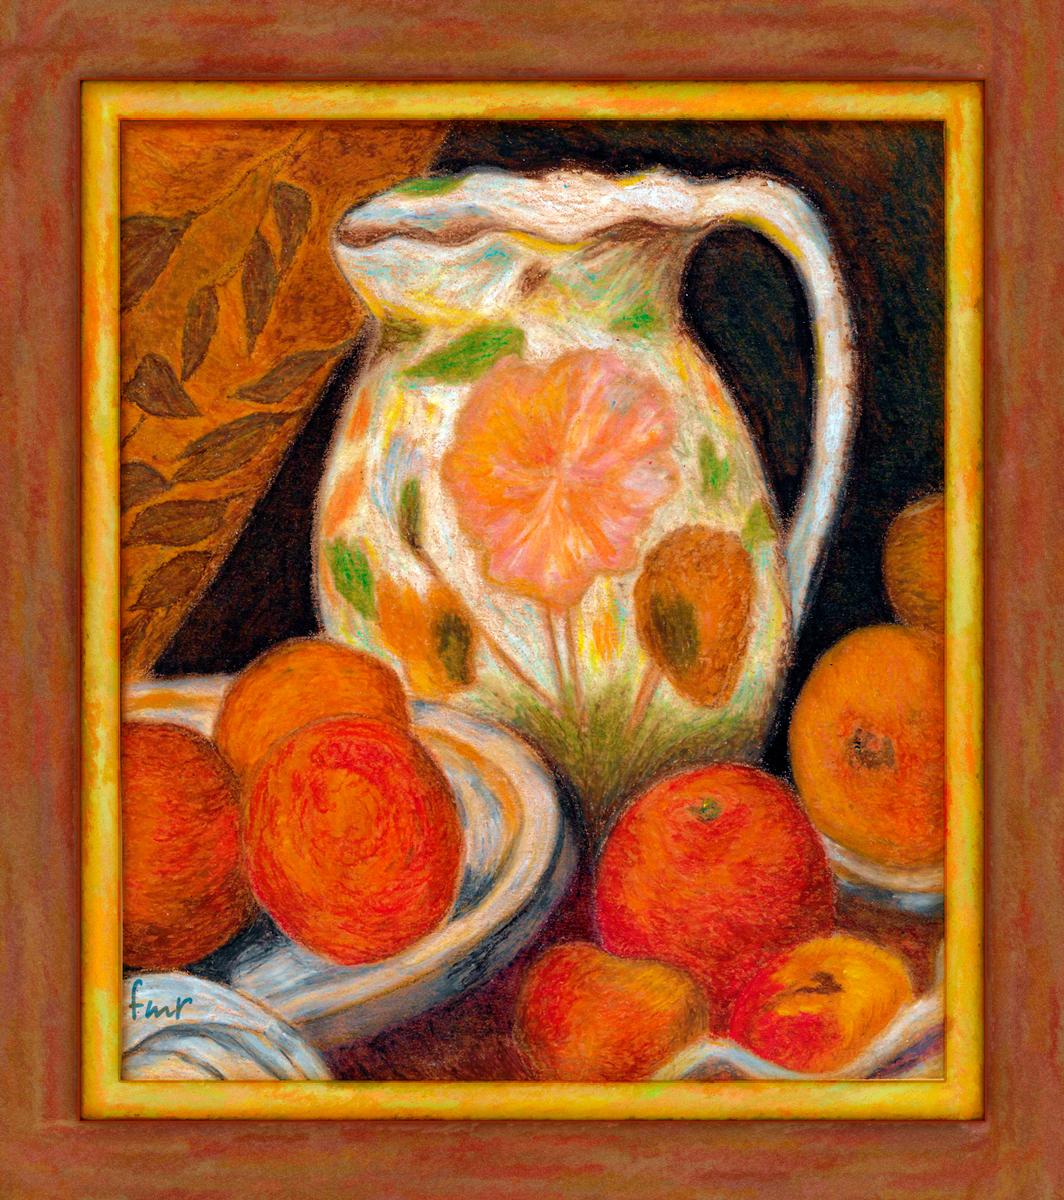 Pitcher and Fruits by Saltwater